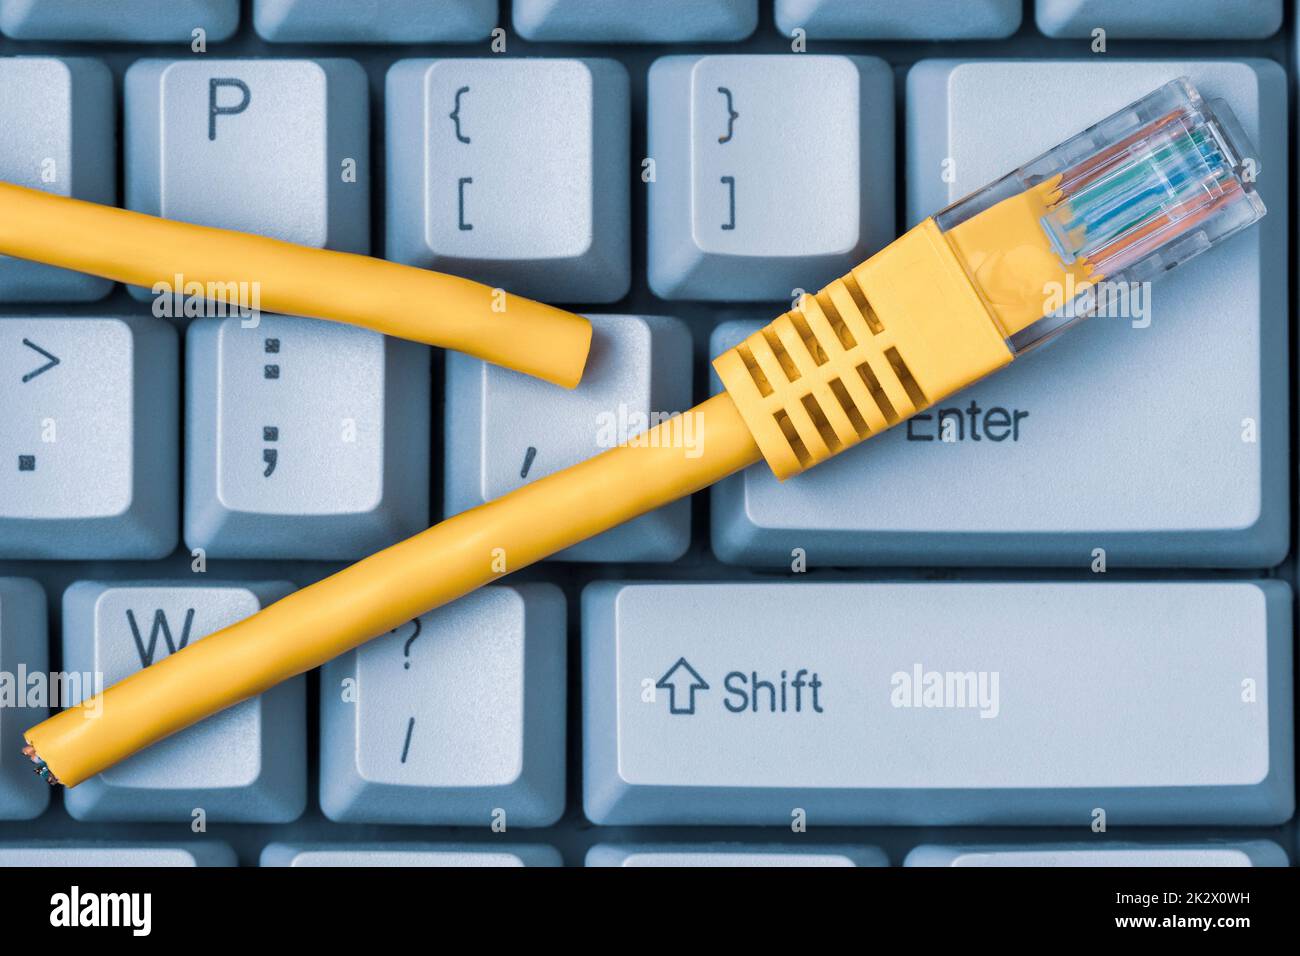 Blue computer keyboard with yellow network cable cutted off Stock Photo